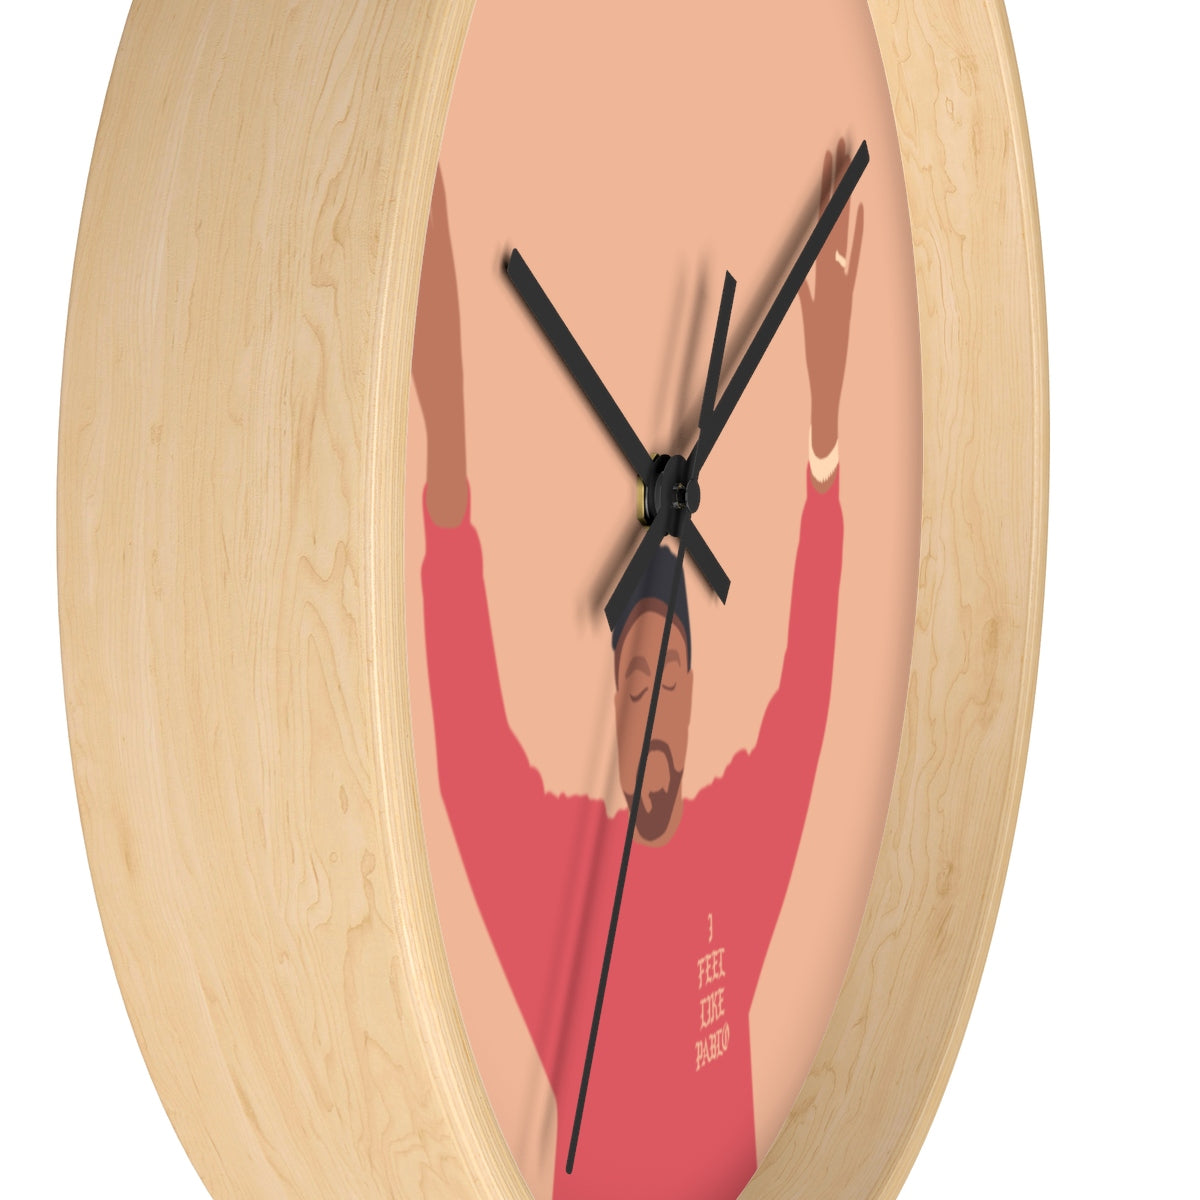 Kanye West I Feel Like Pablo Wall clock - The Life of Pablo TLOP tour merch inspired-Archethype